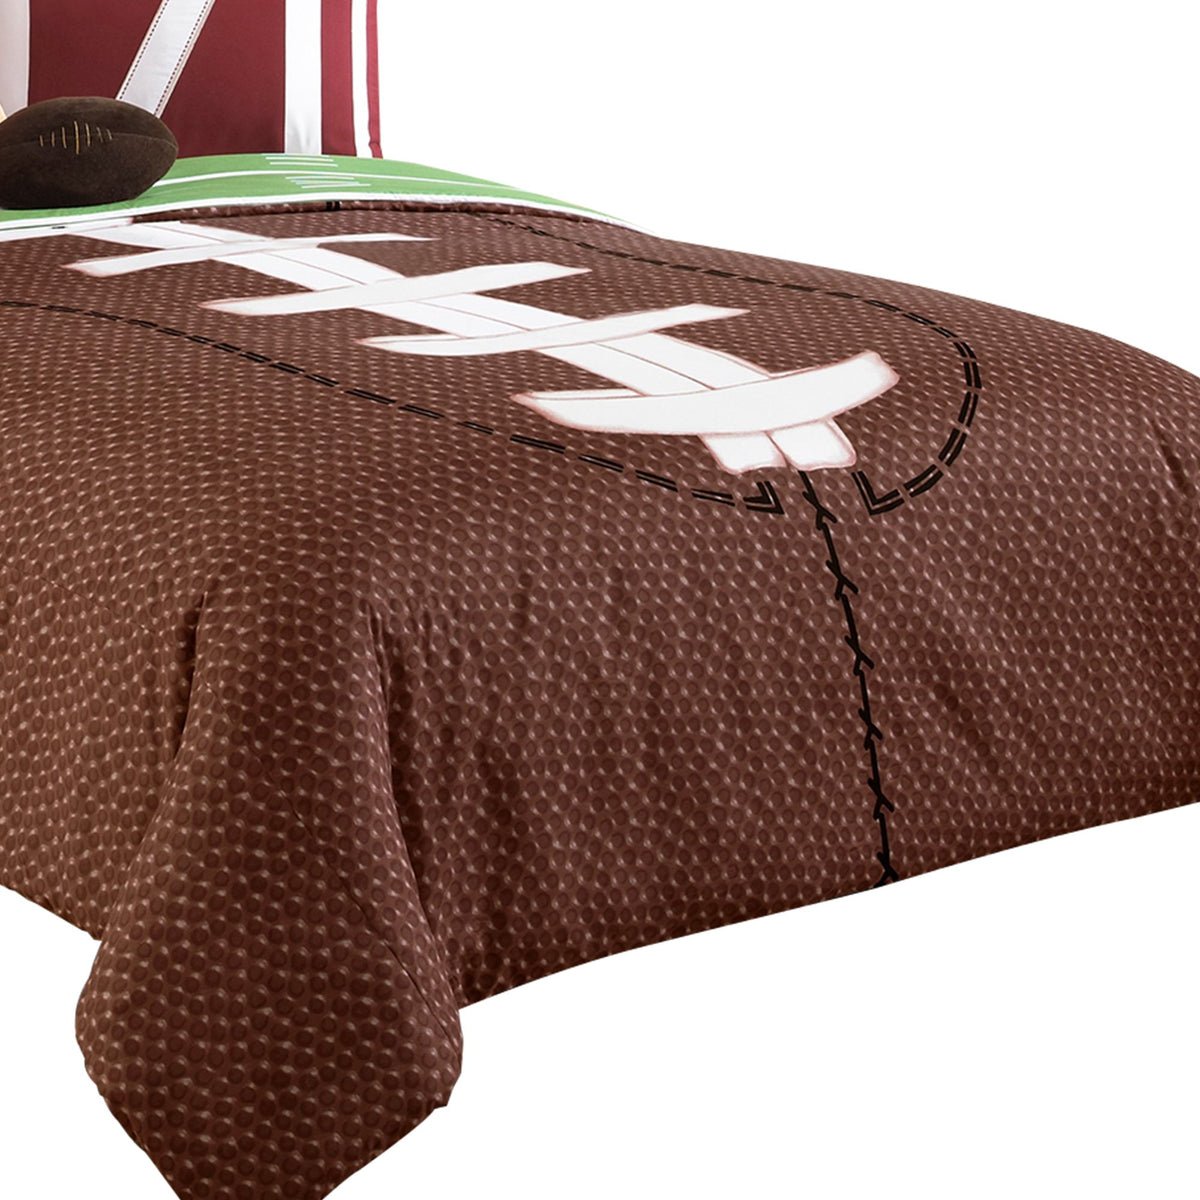 5 Piece Twin Comforter Set with Football Field Print, Brown and Green - BM225153